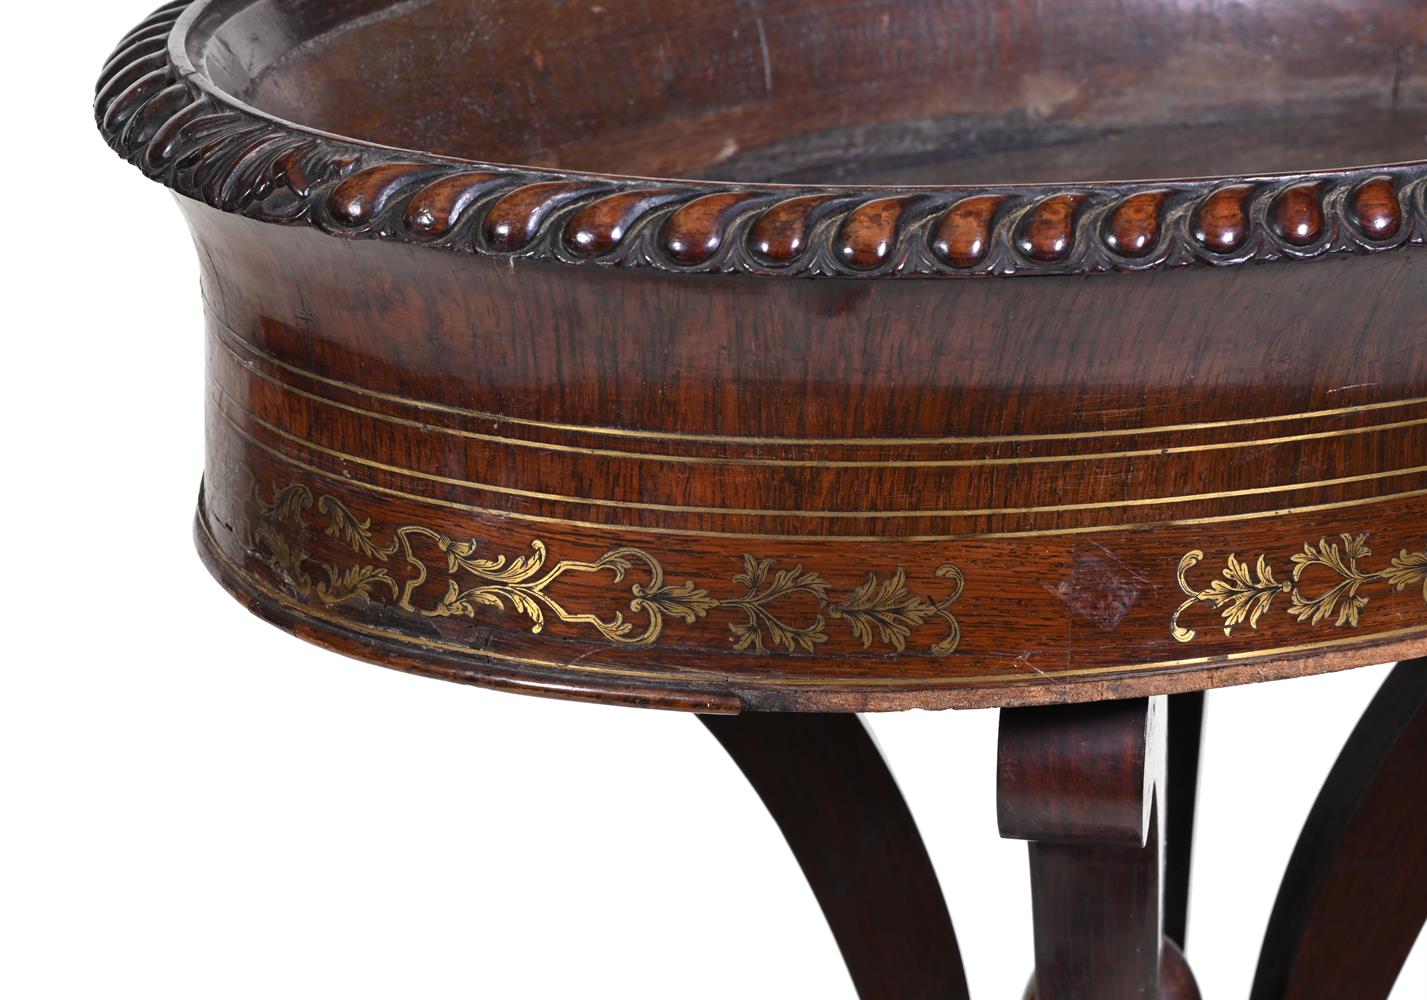 Y AN EARLY VICTORIAN BRASS-INLAID ROSEWOOD PEDESTAL JARDINIERE STAND, MID 19TH CENTURY - Image 5 of 5